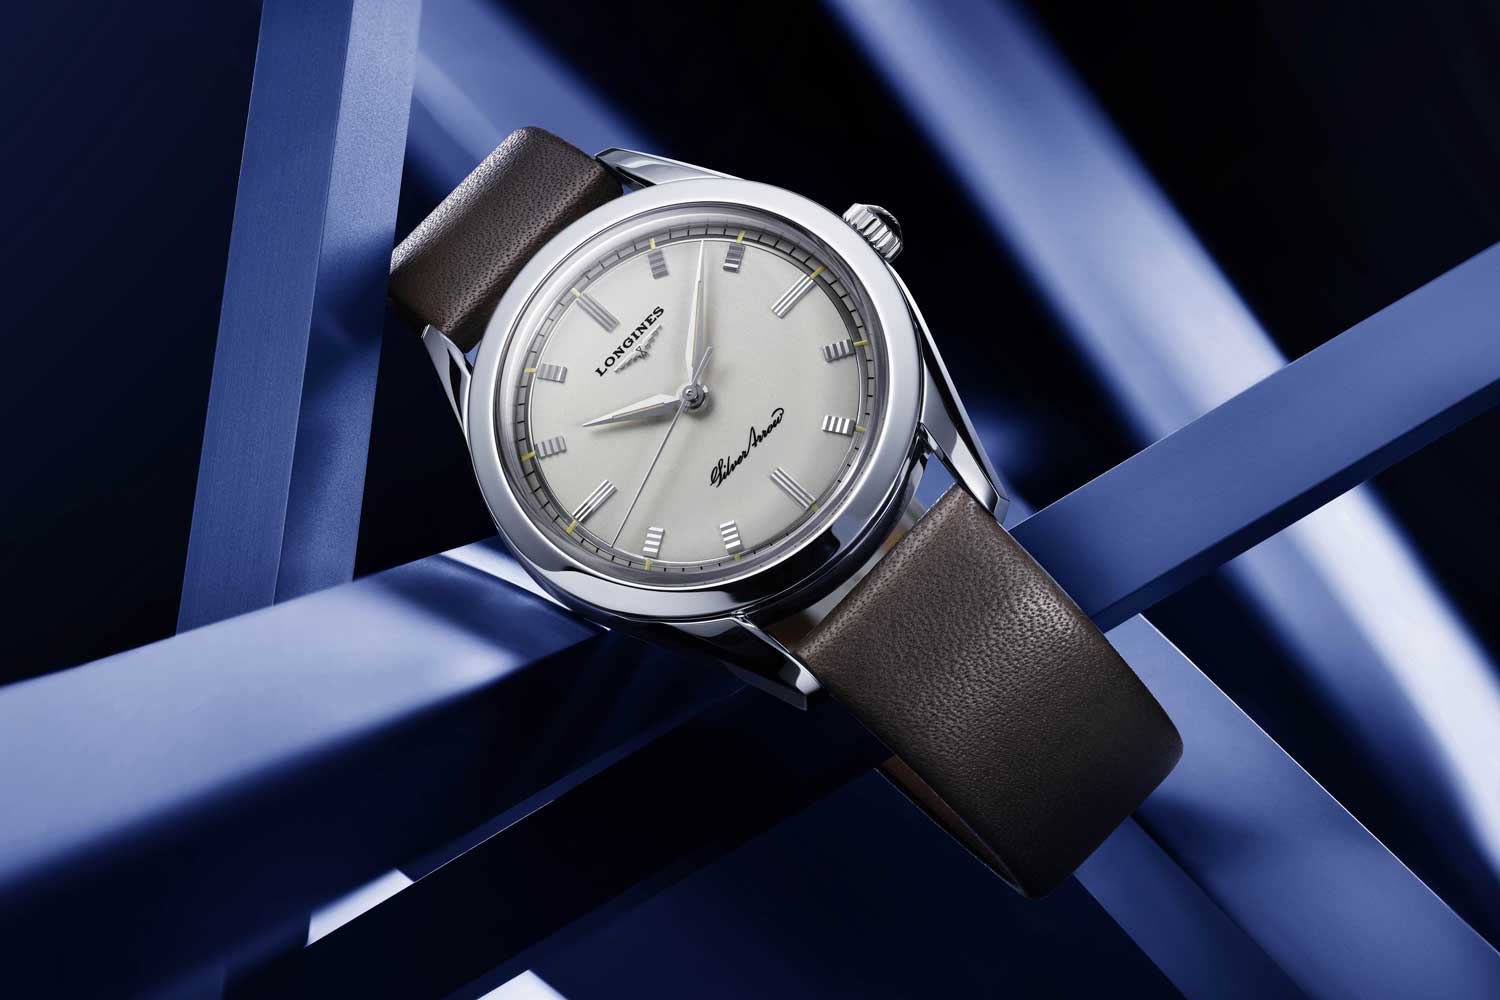 The new Silver Arrow is a classically simple, time-only watch that takes its inspiration from a 1950s original.